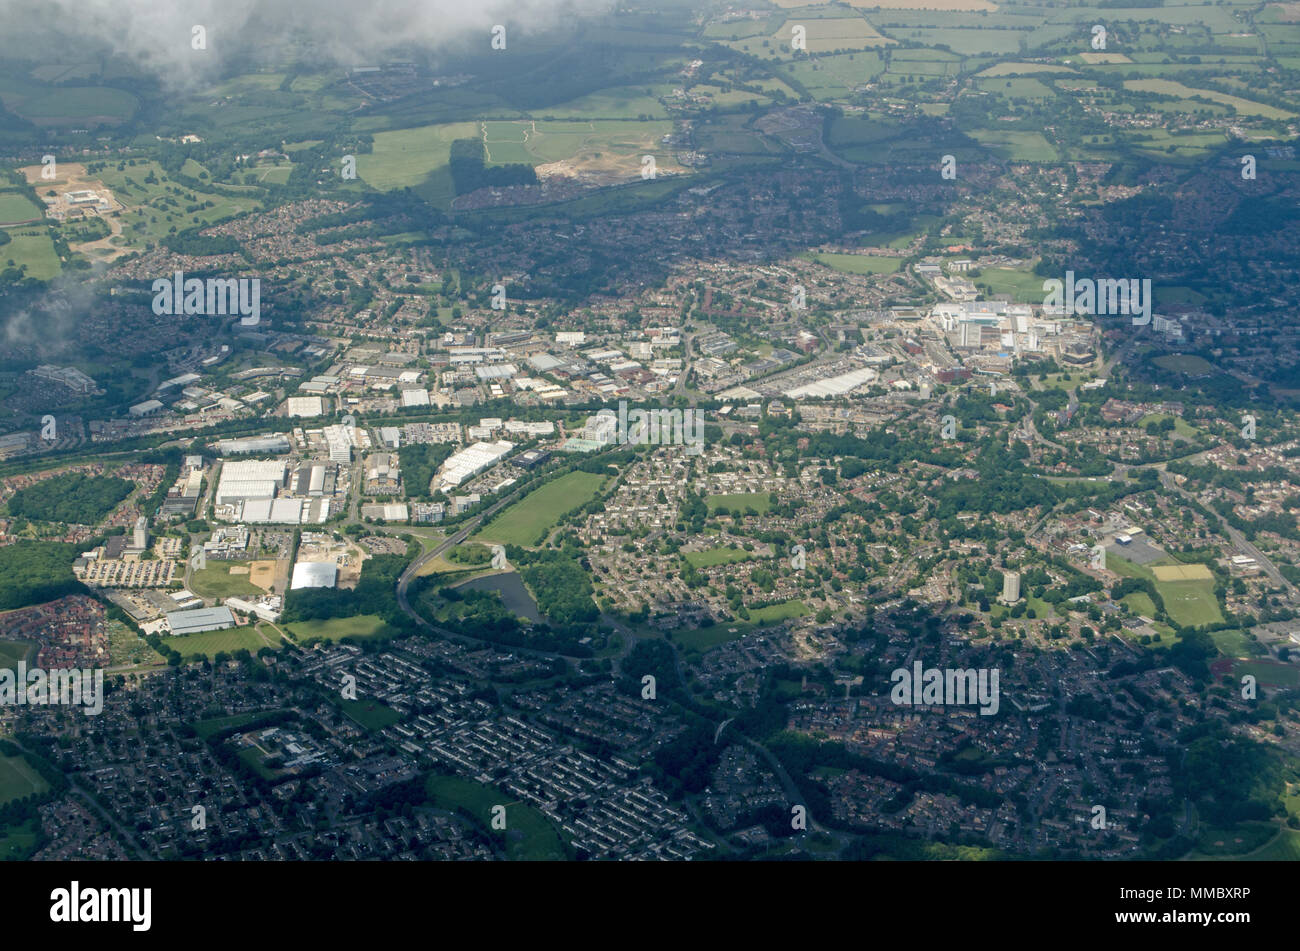 Aerial view of the Berkshire town of Bracknell complete with office blocks, shopping centre and housing estates. Stock Photo